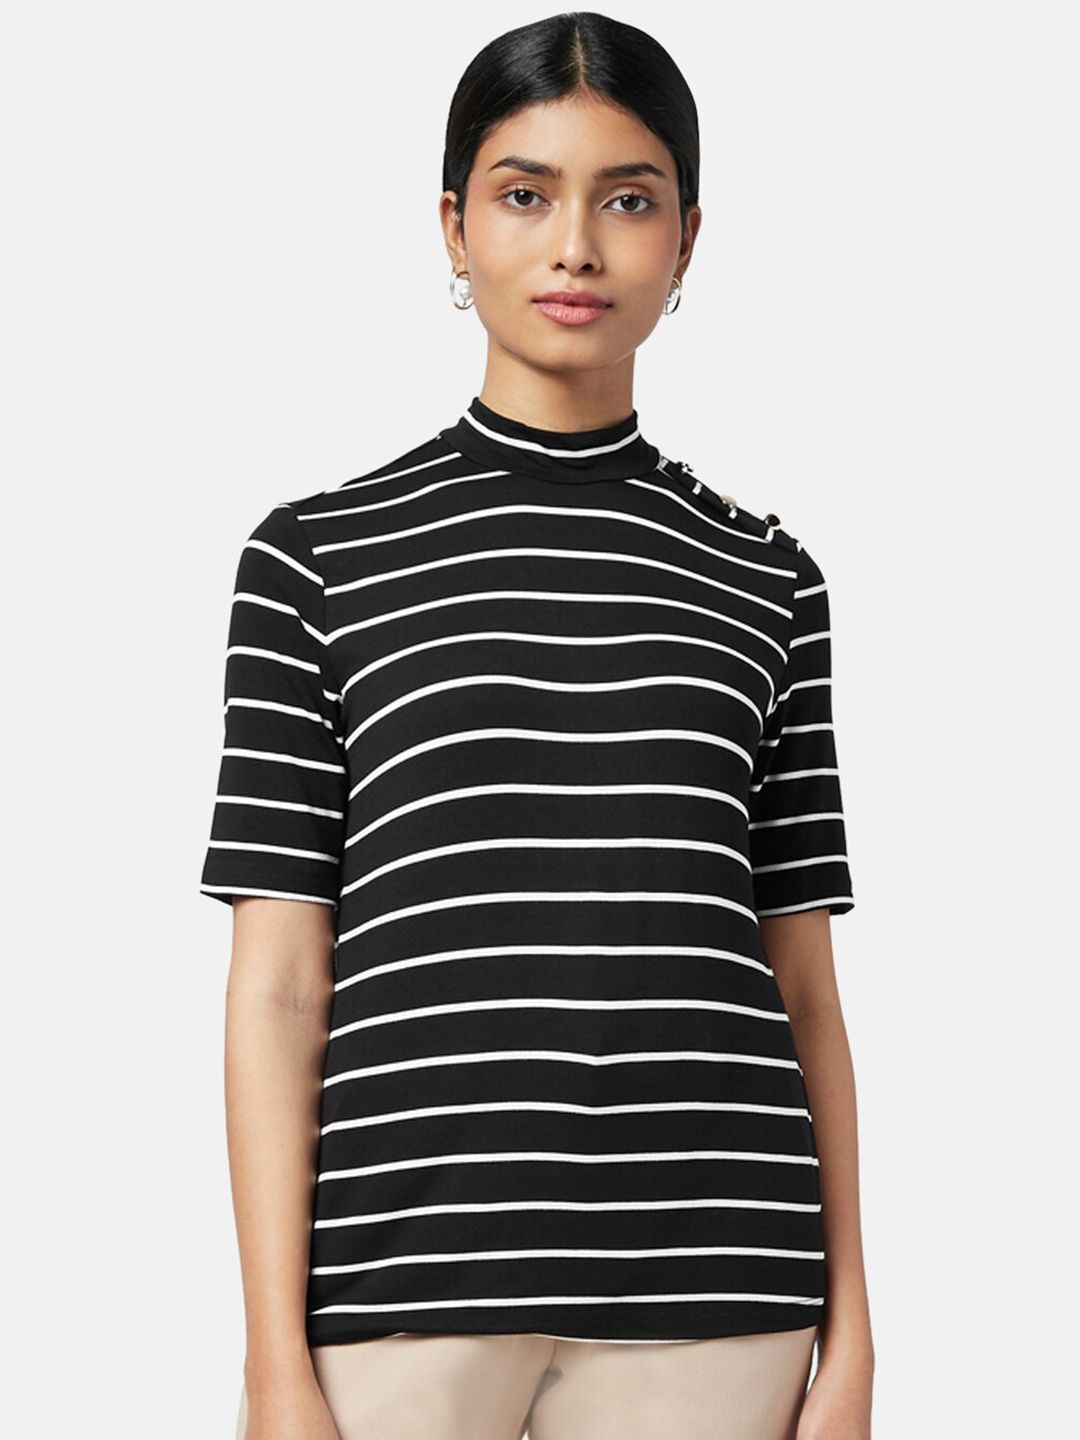 Annabelle by Pantaloons Black & White Striped Monochrome Top Price in India